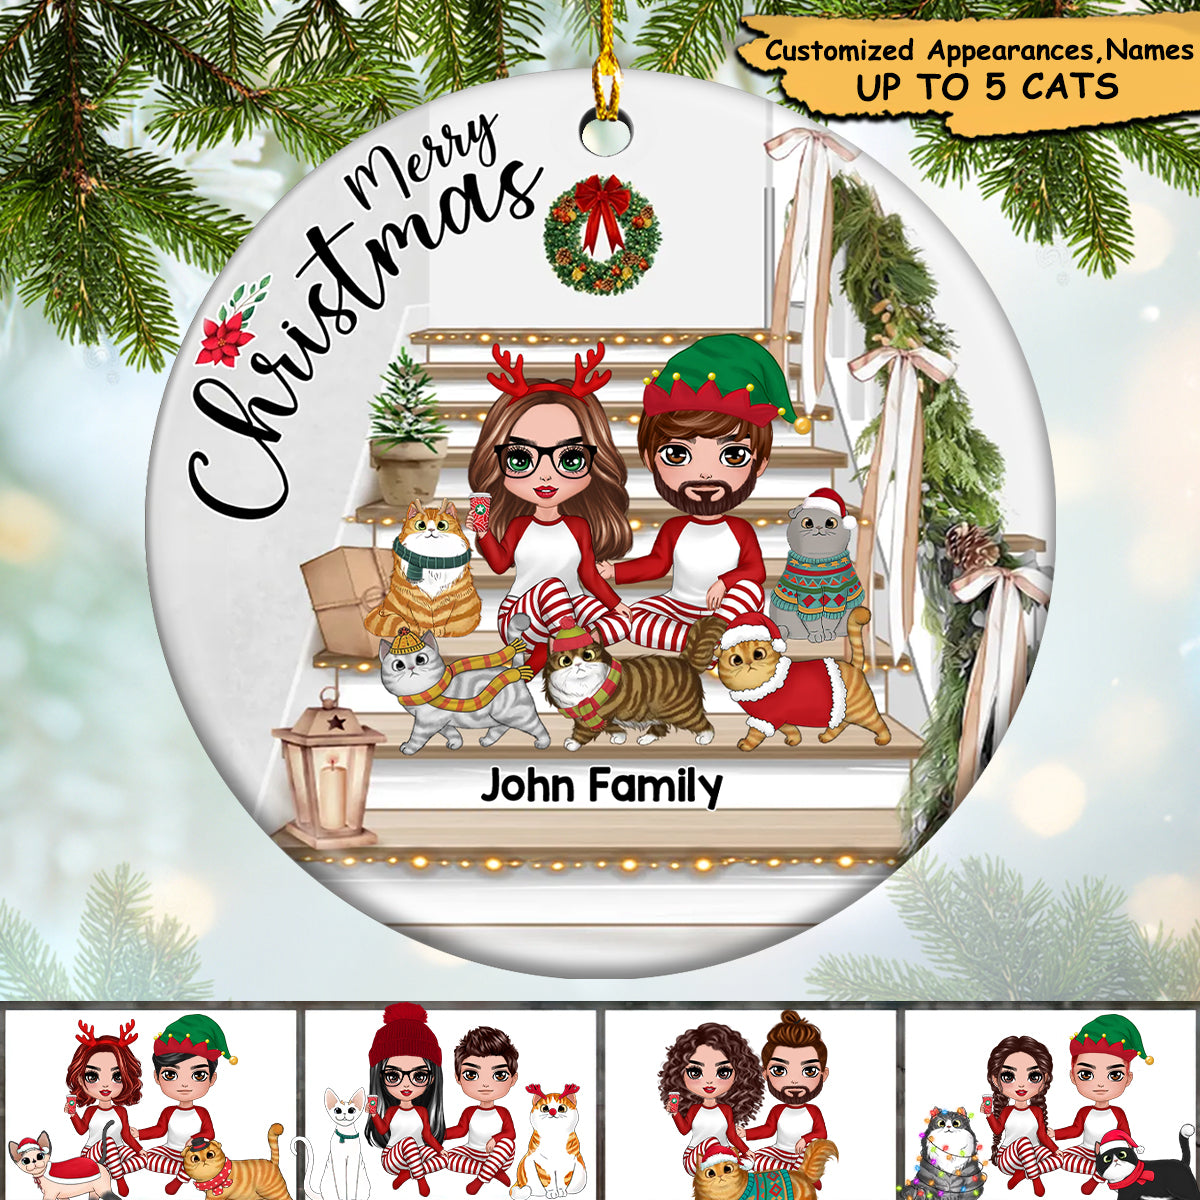 Wife & Husband, Doll Couple Sitting With Cats Christmas Personalized Ornament